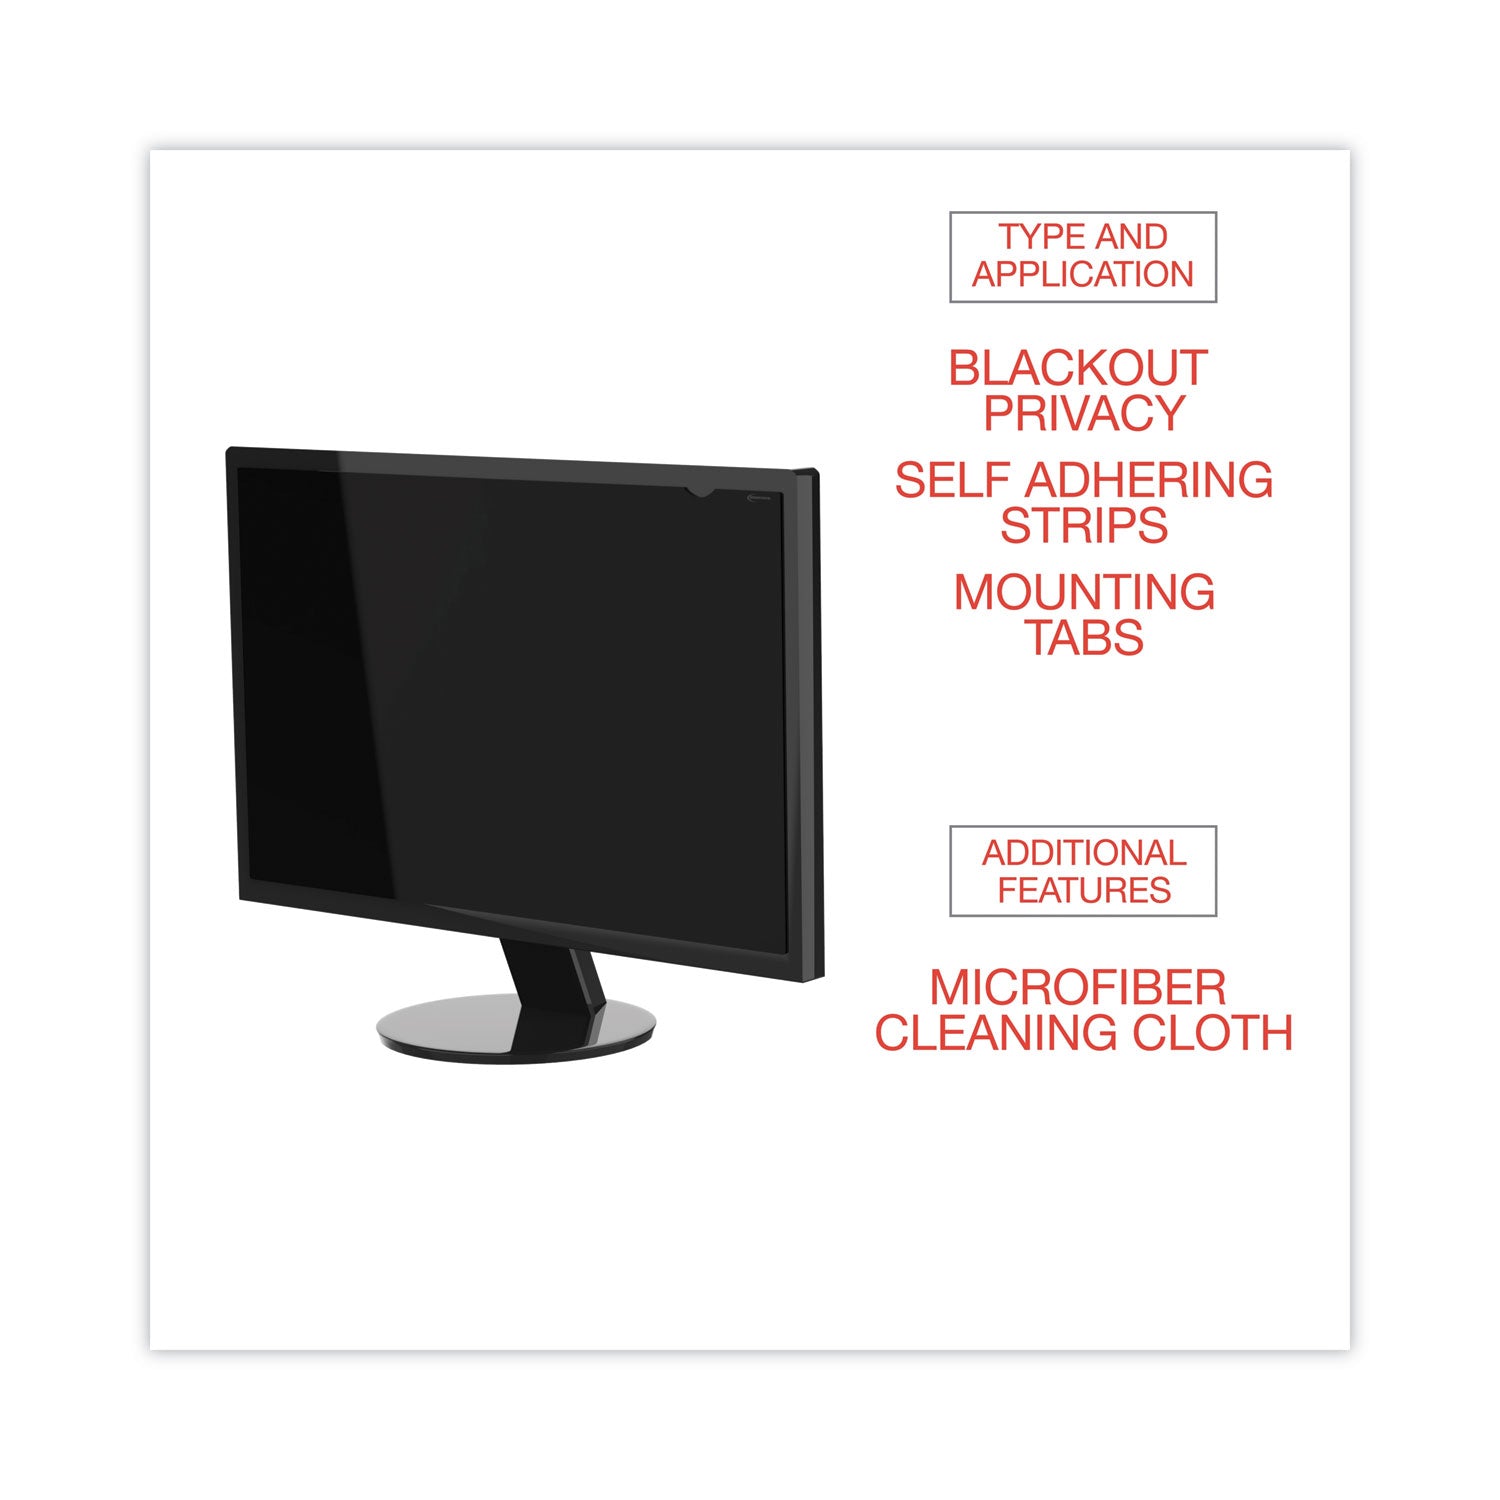 blackout-privacy-filter-for-27-widescreen-flat-panel-monitor-169-aspect-ratio_ivrblf27w - 6